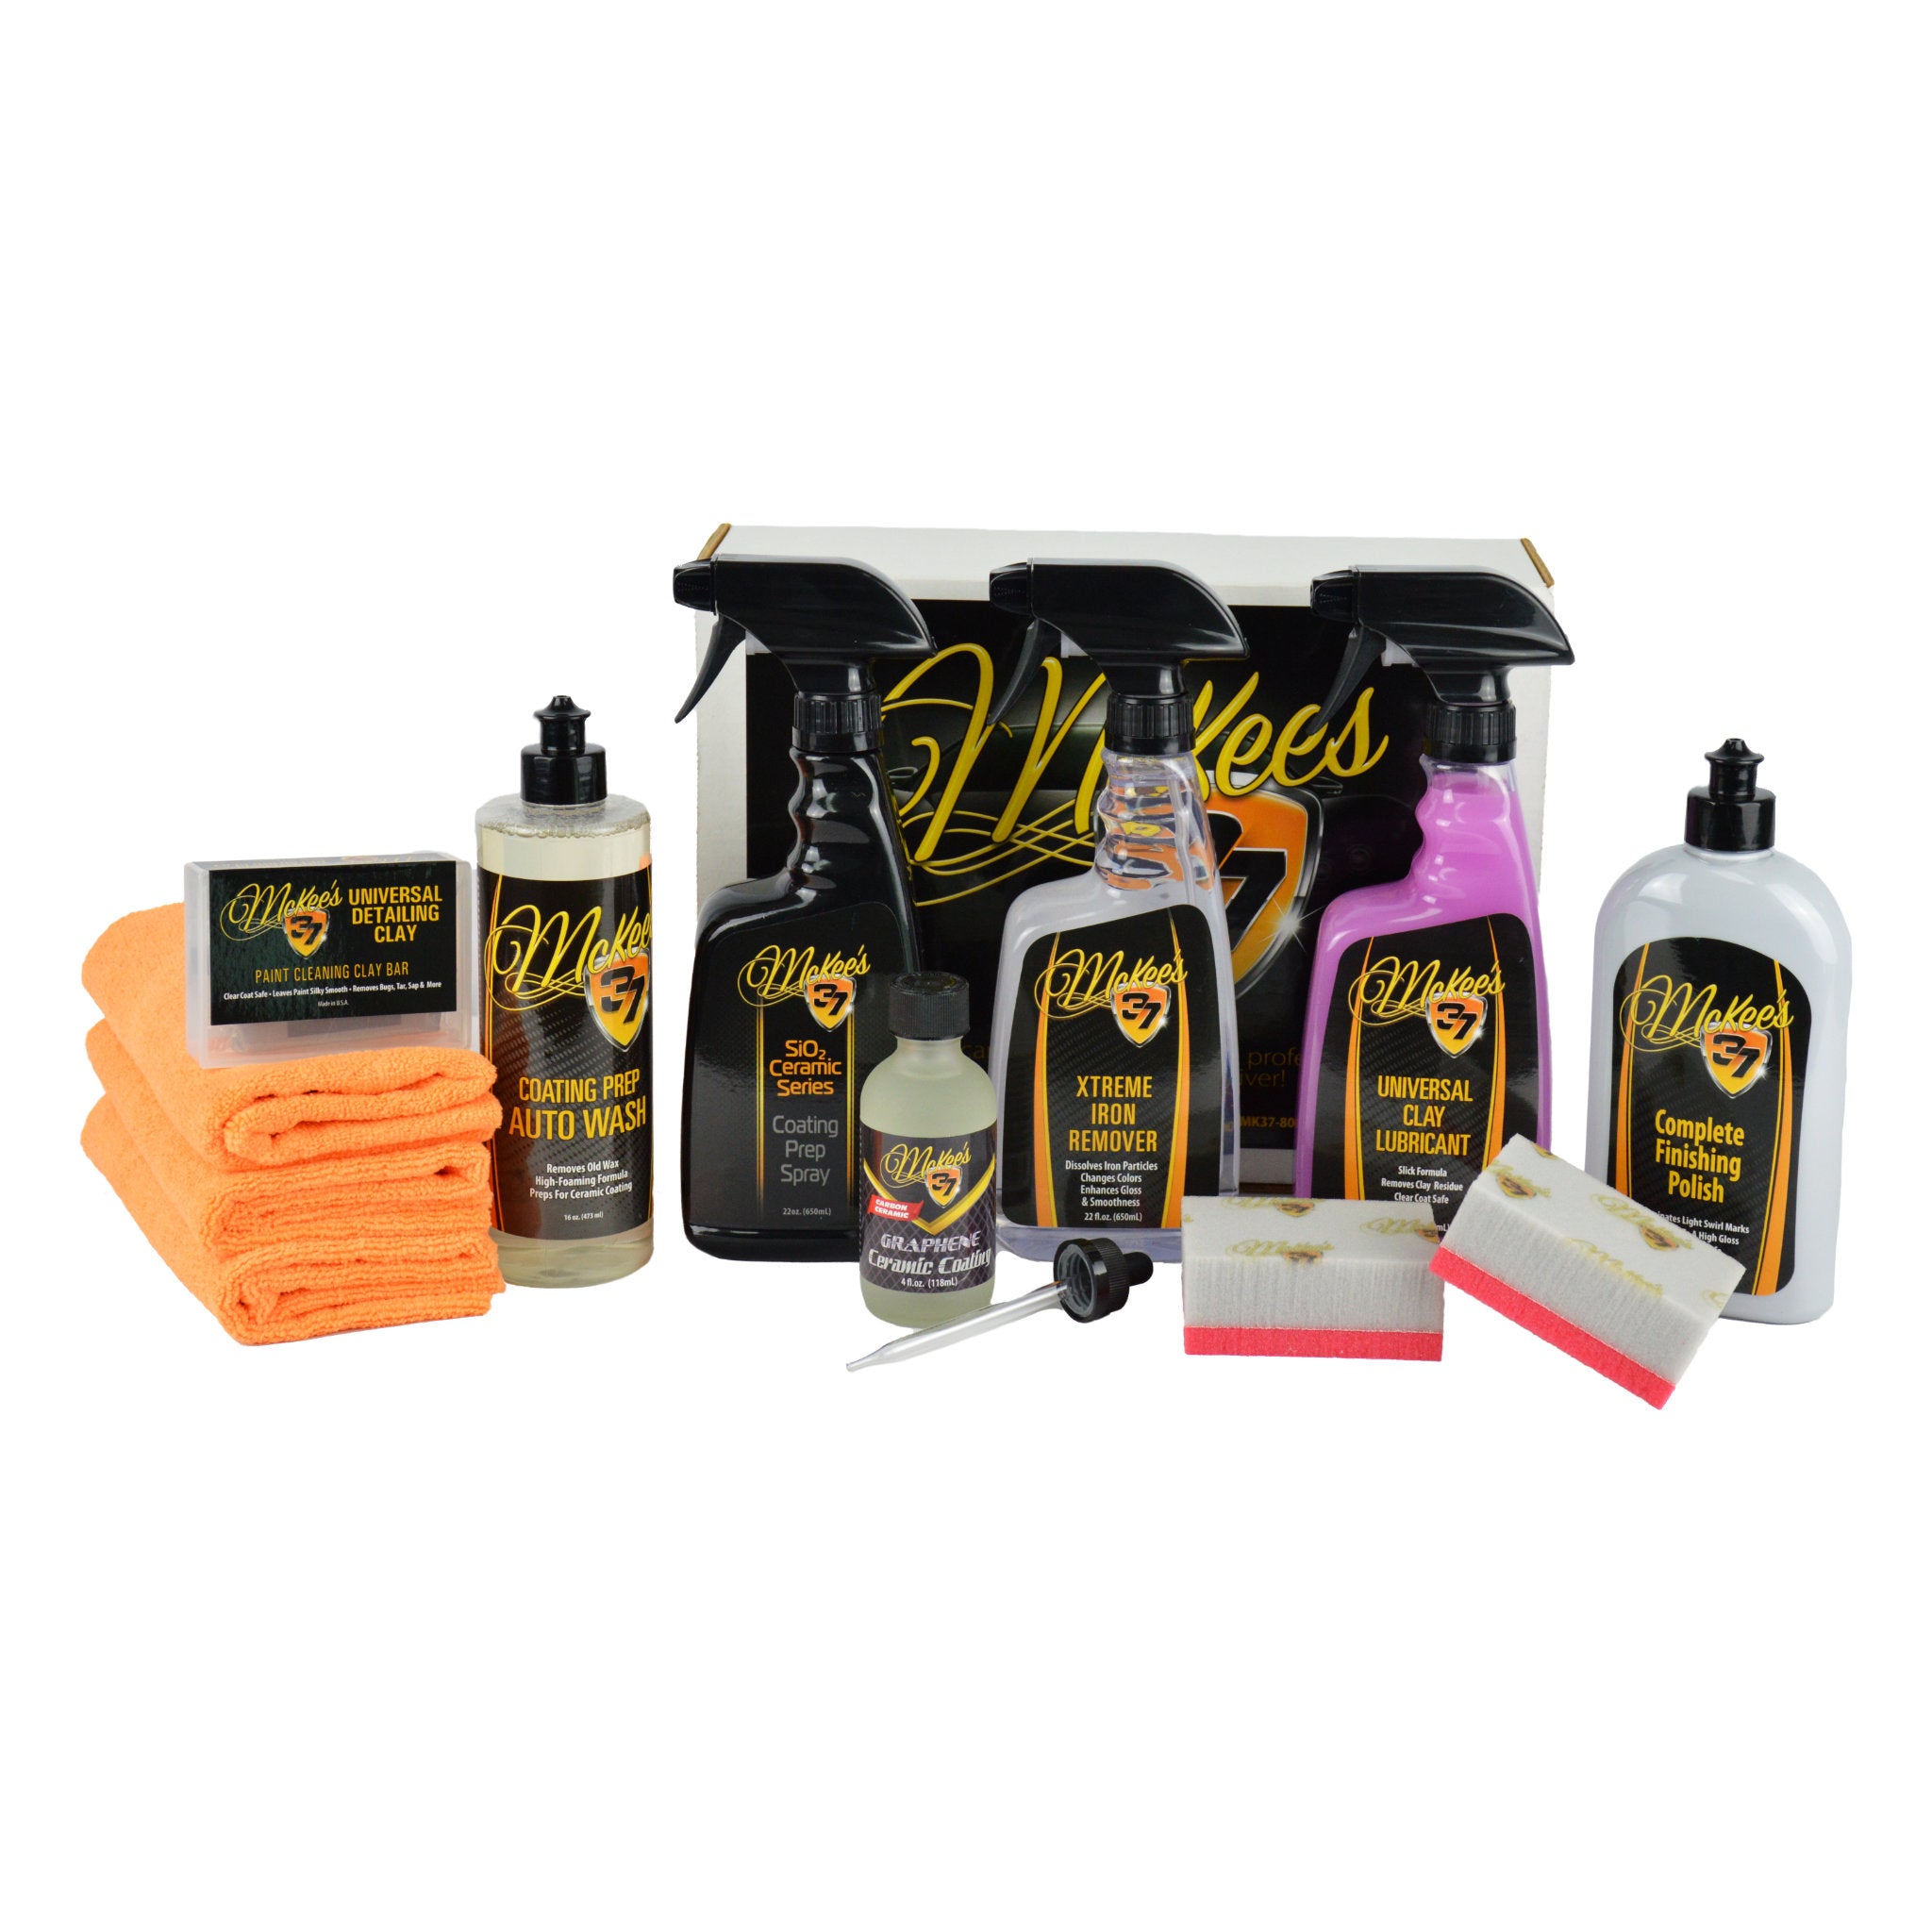 Wet Wax Car Wax Water and Dirt Repellent Shine | Carnauba Infused for  Better Performance, Durability, and Shine. (1 Gallon)